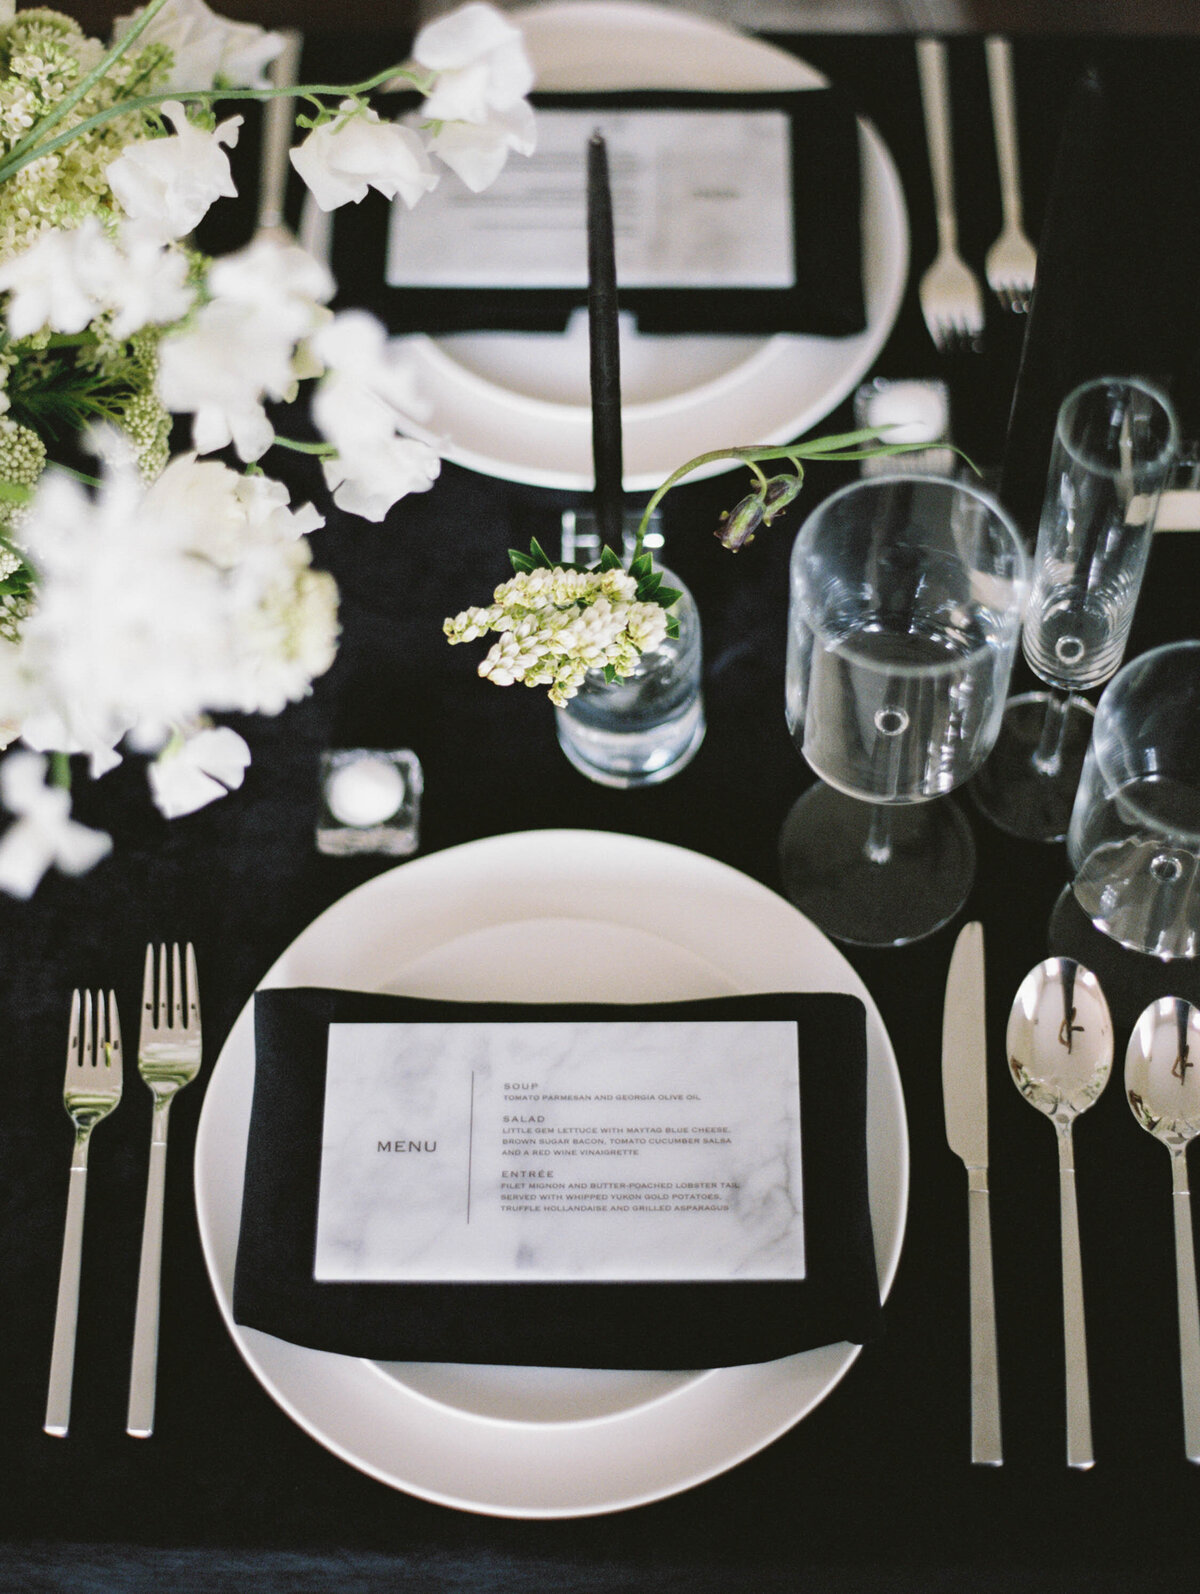 max-owens-design-black-white-modern-wedding-11-marble-placesetting